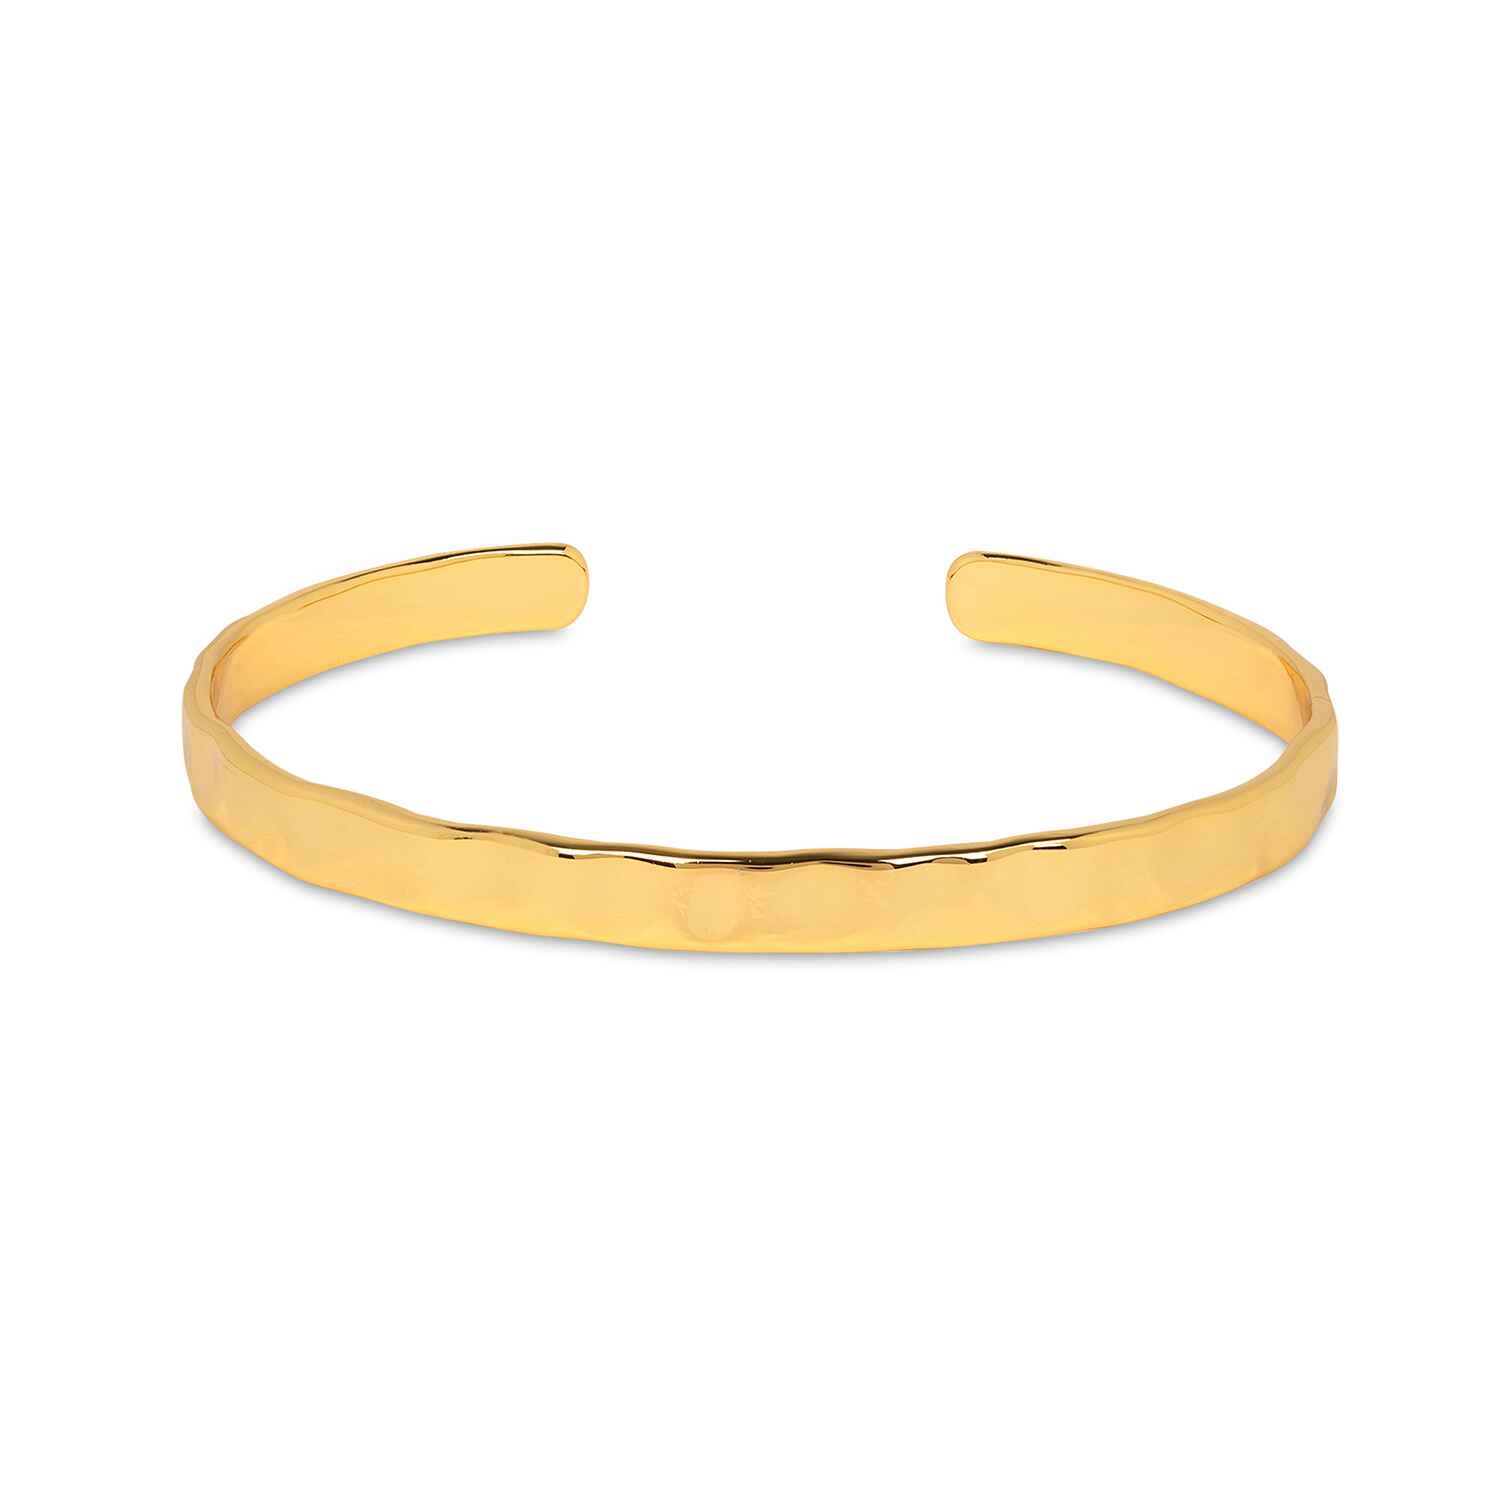 The Otto Hammered Gold Bangle is the ultimate sustainable cuff bracelet. Its gently hammered surface catches the light, creating a nuanced surface that's perfectly imperfect. Made to be stacked, yet delicate enough to wear alone.